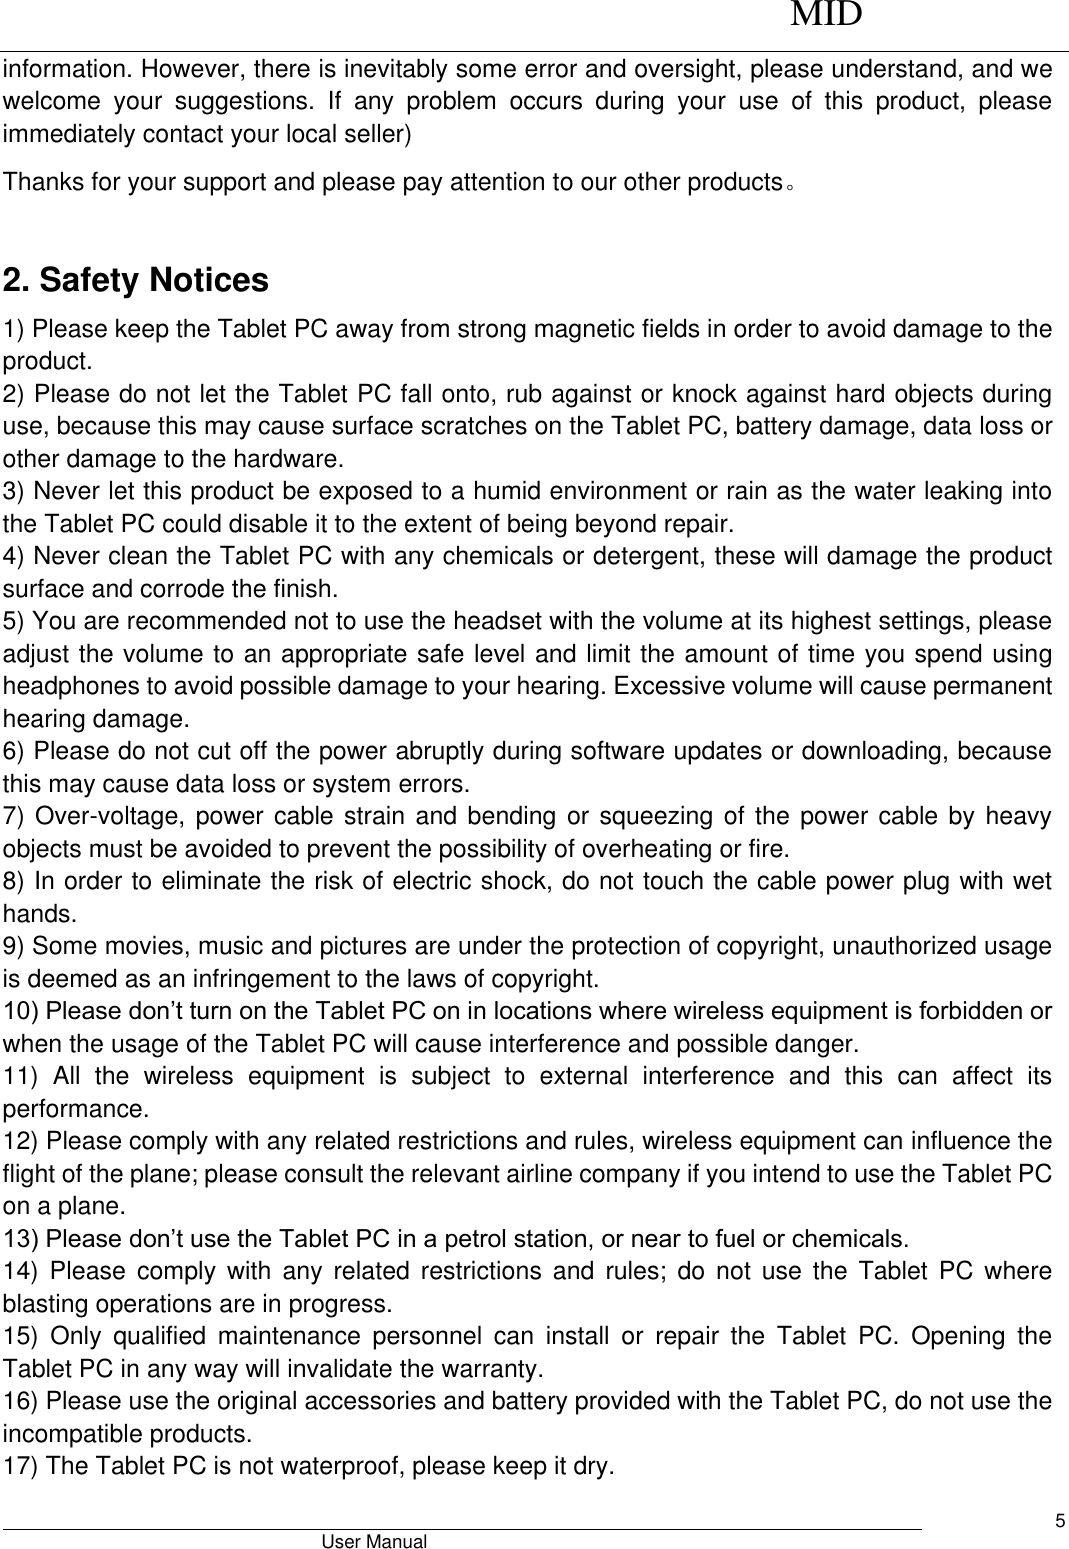      MID                                        User Manual     5 information. However, there is inevitably some error and oversight, please understand, and we welcome  your  suggestions.  If  any  problem  occurs  during  your  use  of  this  product,  please immediately contact your local seller) Thanks for your support and please pay attention to our other products。  2. Safety Notices 1) Please keep the Tablet PC away from strong magnetic fields in order to avoid damage to the product.   2) Please do not let the Tablet PC fall onto, rub against or knock against hard objects during use, because this may cause surface scratches on the Tablet PC, battery damage, data loss or other damage to the hardware.   3) Never let this product be exposed to a humid environment or rain as the water leaking into the Tablet PC could disable it to the extent of being beyond repair.   4) Never clean the Tablet PC with any chemicals or detergent, these will damage the product surface and corrode the finish.   5) You are recommended not to use the headset with the volume at its highest settings, please adjust the volume to an appropriate safe level and limit the amount of time you spend using headphones to avoid possible damage to your hearing. Excessive volume will cause permanent hearing damage.   6) Please do not cut off the power abruptly during software updates or downloading, because this may cause data loss or system errors. 7) Over-voltage, power cable strain and bending or squeezing of the power cable by heavy objects must be avoided to prevent the possibility of overheating or fire.   8) In order to eliminate the risk of electric shock, do not touch the cable power plug with wet hands.   9) Some movies, music and pictures are under the protection of copyright, unauthorized usage is deemed as an infringement to the laws of copyright.   10) Please don’t turn on the Tablet PC on in locations where wireless equipment is forbidden or when the usage of the Tablet PC will cause interference and possible danger.   11)  All  the  wireless  equipment  is  subject  to  external  interference  and  this  can  affect  its performance.   12) Please comply with any related restrictions and rules, wireless equipment can influence the flight of the plane; please consult the relevant airline company if you intend to use the Tablet PC on a plane.   13) Please don’t use the Tablet PC in a petrol station, or near to fuel or chemicals.   14)  Please  comply  with  any  related  restrictions  and  rules;  do  not  use  the  Tablet  PC  where blasting operations are in progress.   15)  Only  qualified  maintenance  personnel  can  install  or  repair  the  Tablet  PC.  Opening  the Tablet PC in any way will invalidate the warranty.   16) Please use the original accessories and battery provided with the Tablet PC, do not use the incompatible products.   17) The Tablet PC is not waterproof, please keep it dry.   